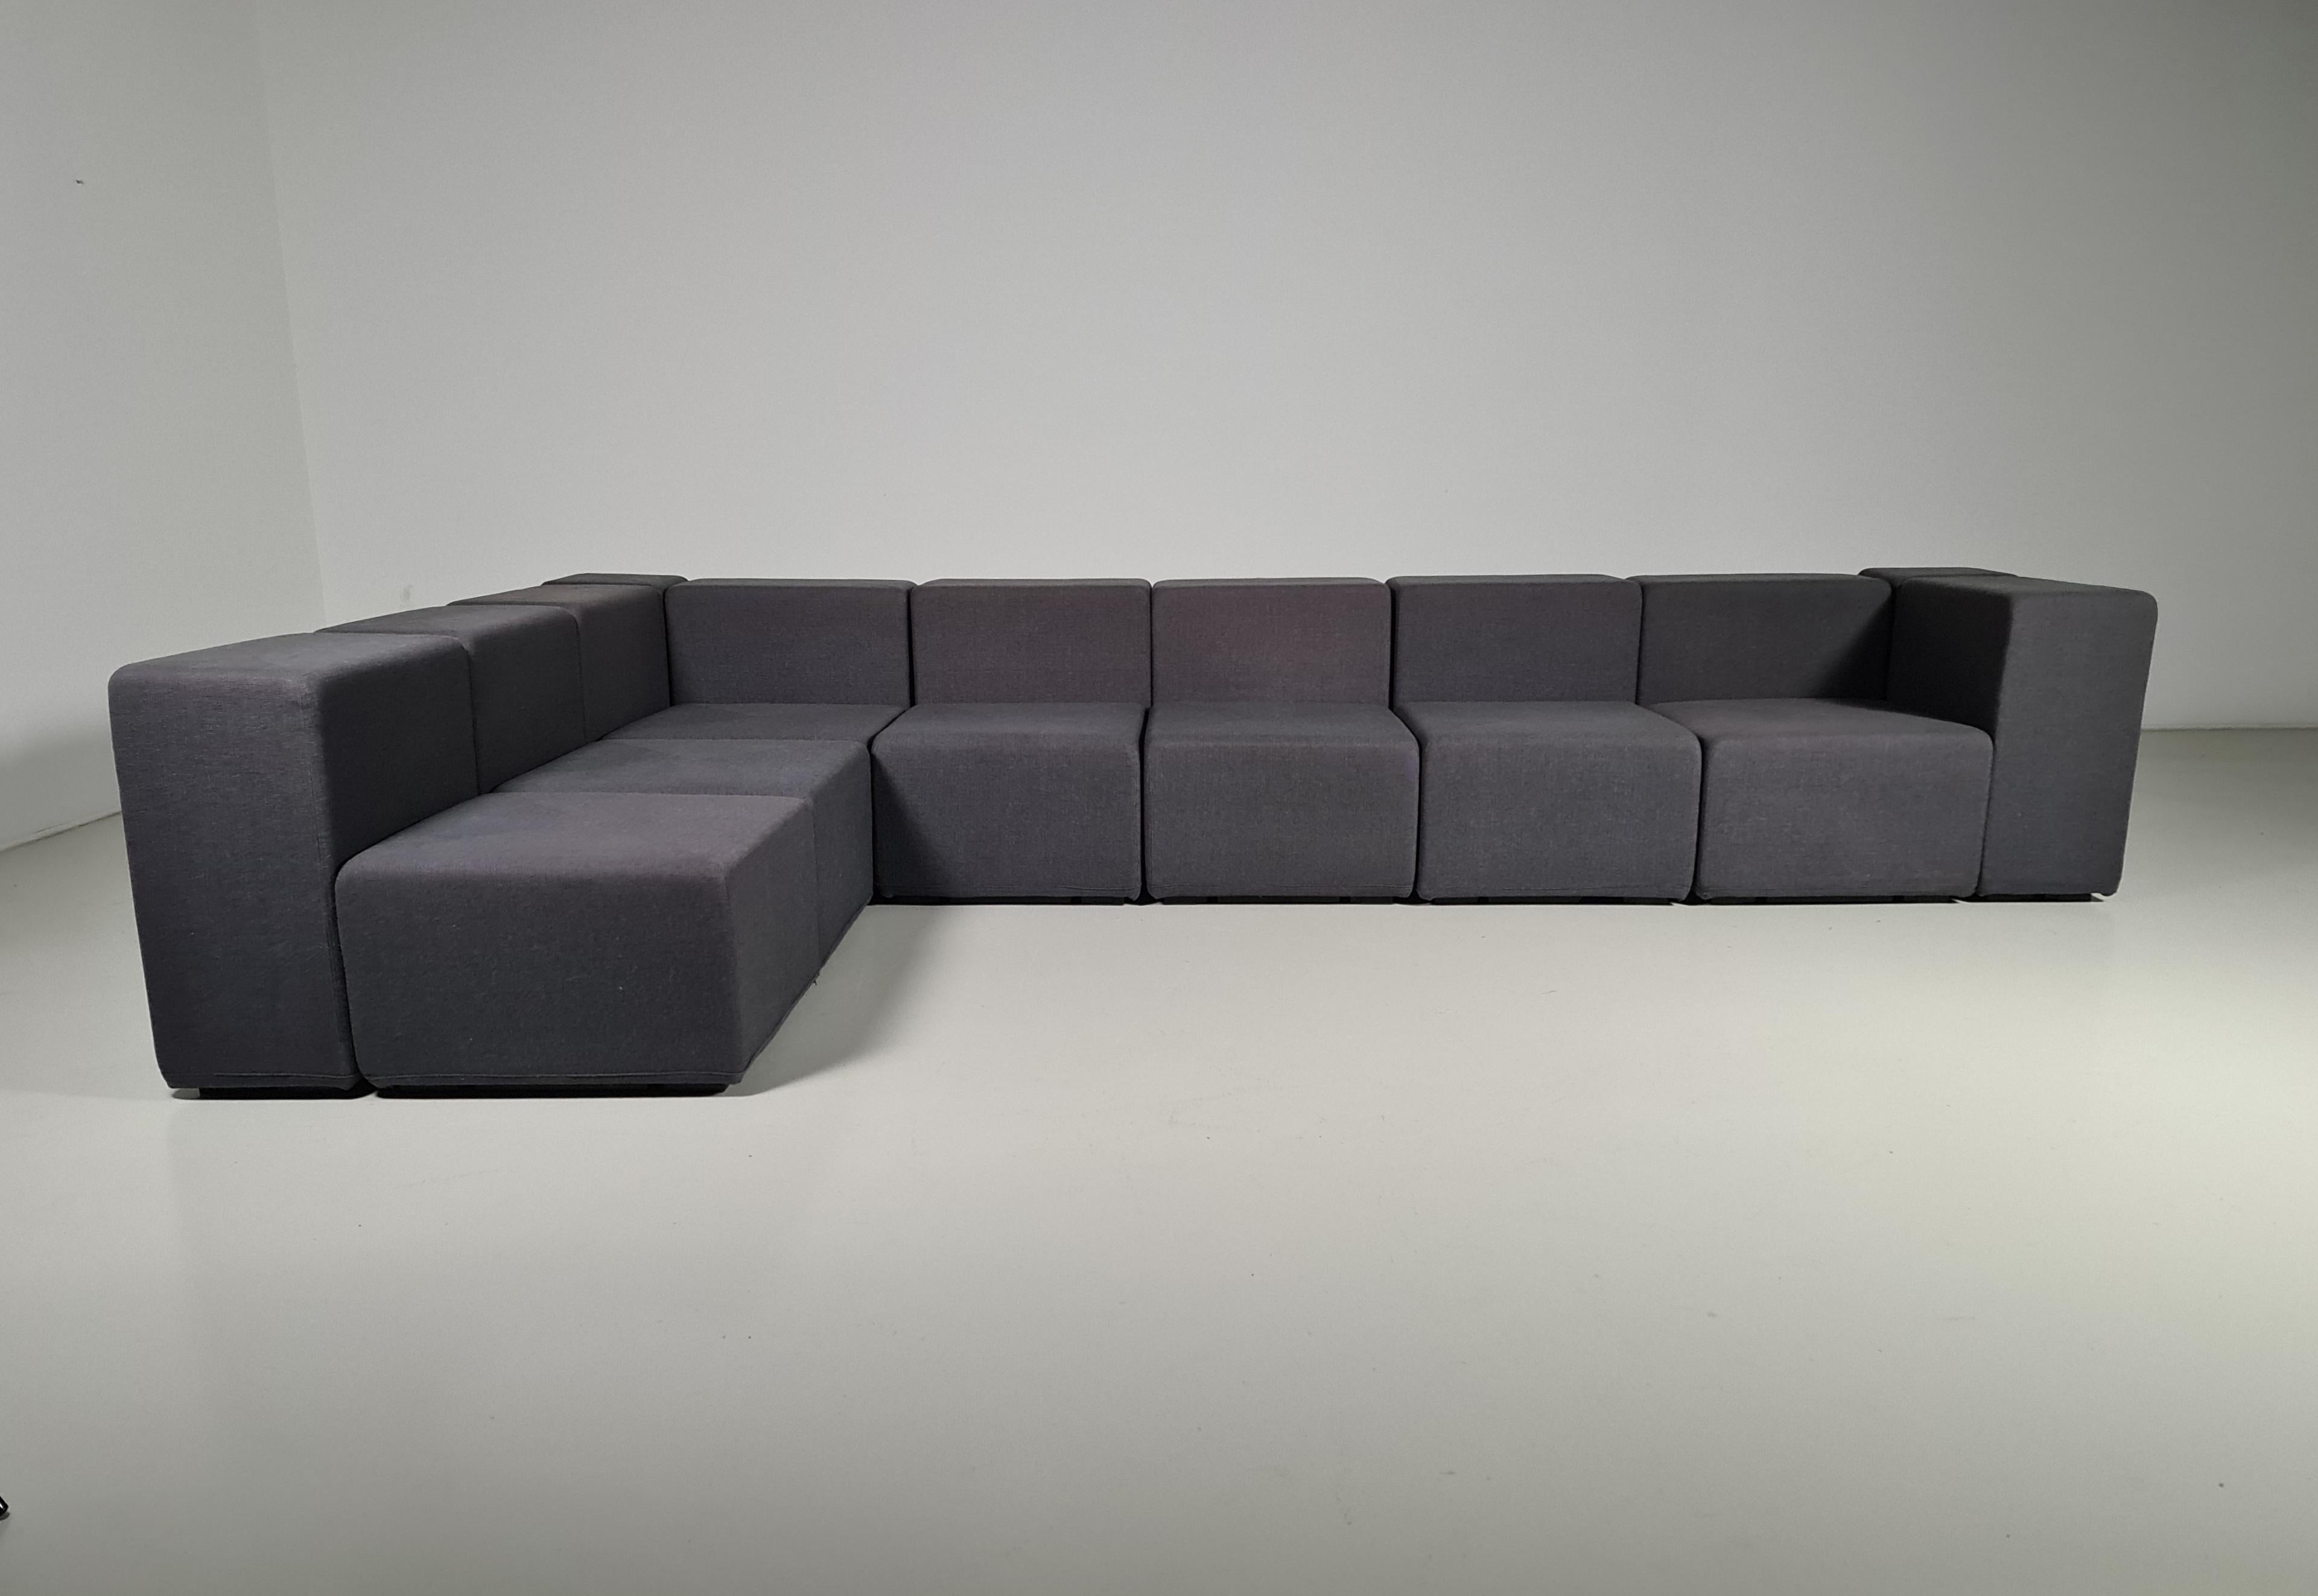 Modular sofa, Sistema 61, Giancarlo Piretti, Anonima Castelli, 1970s

Seven seats with backrest upholstered in its original grey wool.
The seats are connected by chromed steel components and composed of a molded thermoplastic material, with an